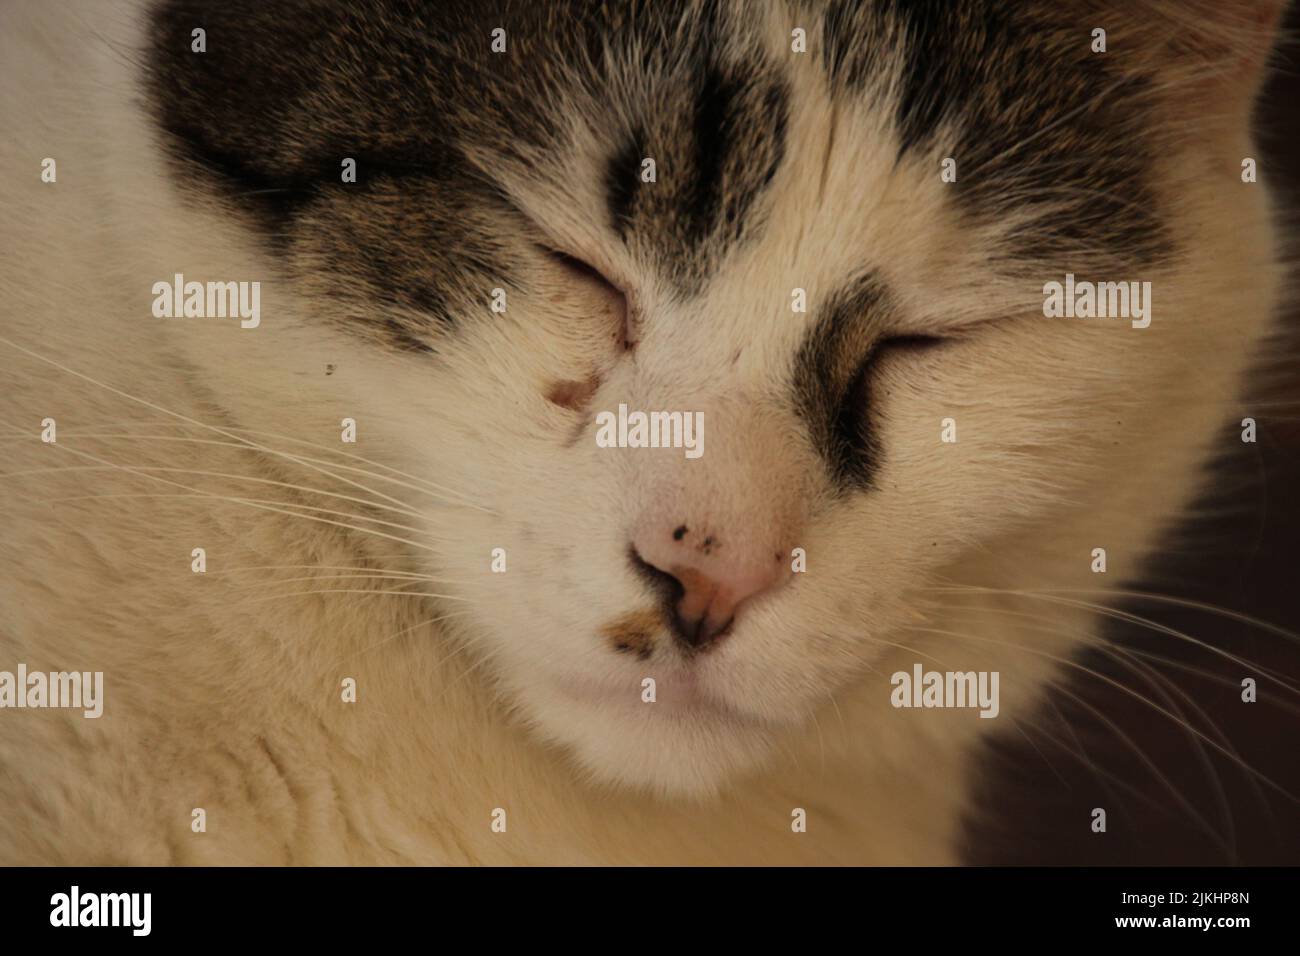 A portrait of a sleeping cat , white with black spots Stock Photo